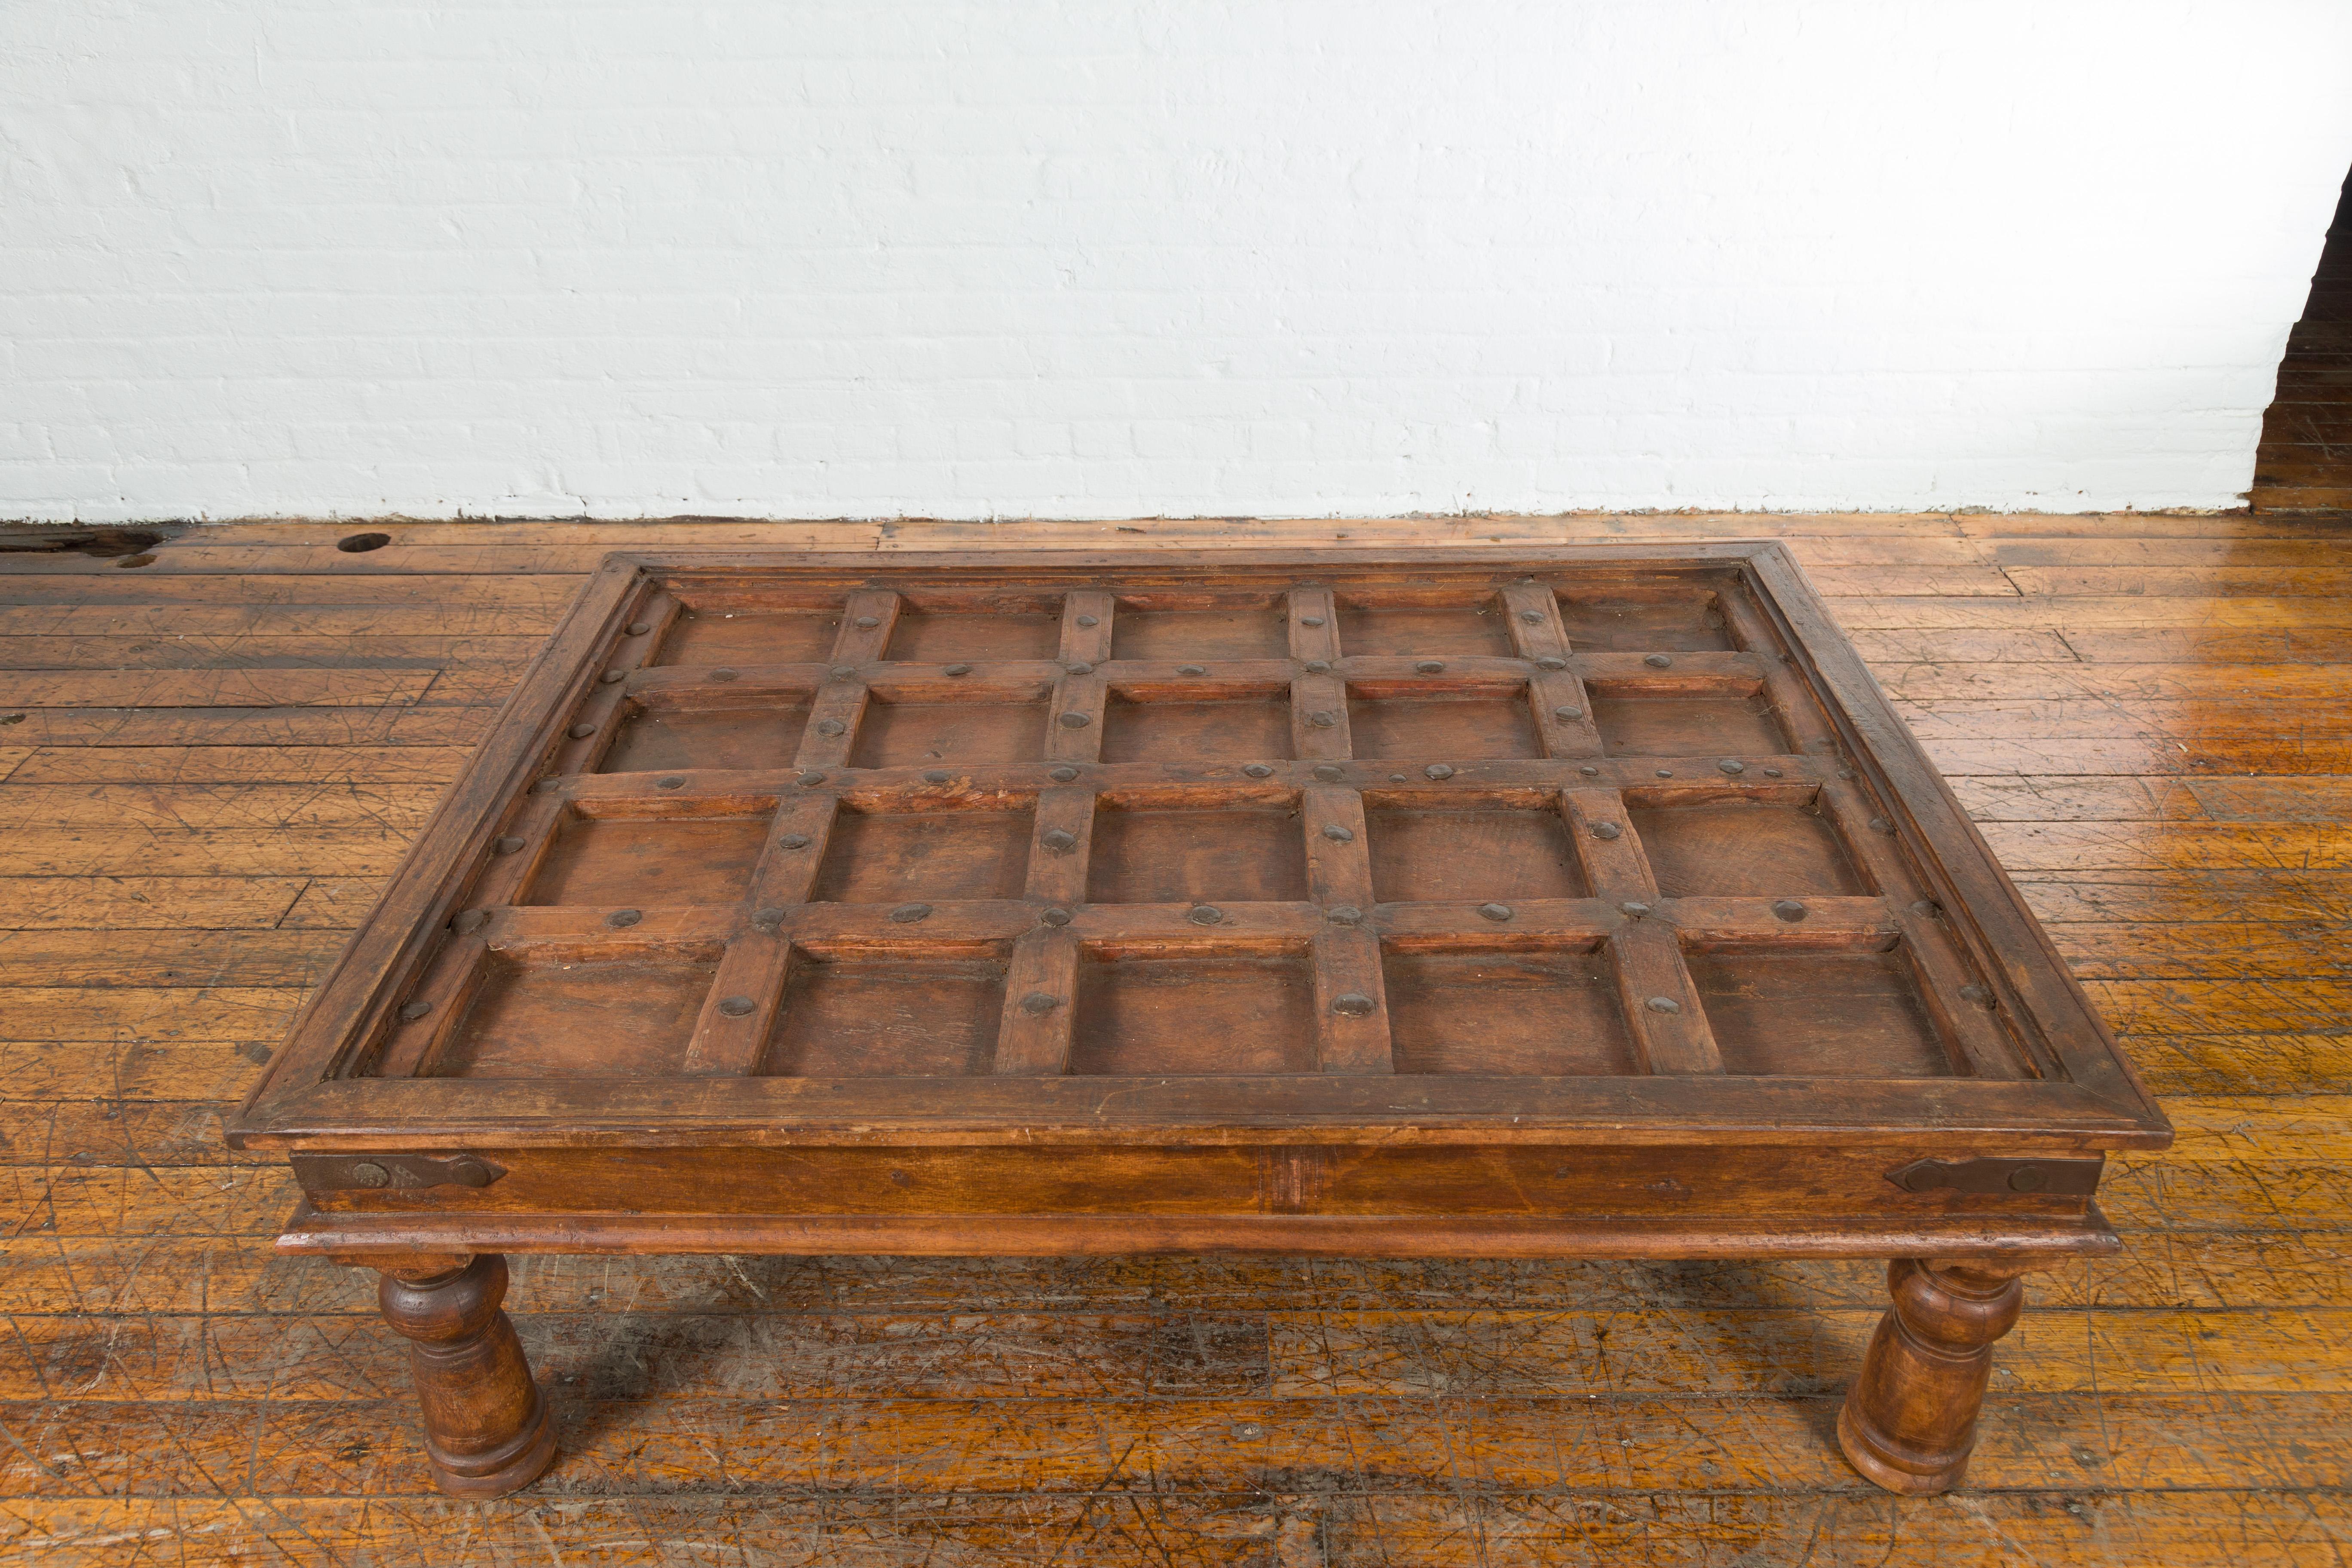 Indian 19th Century Paneled Door with Iron Accents Turned into a Coffee Table 3